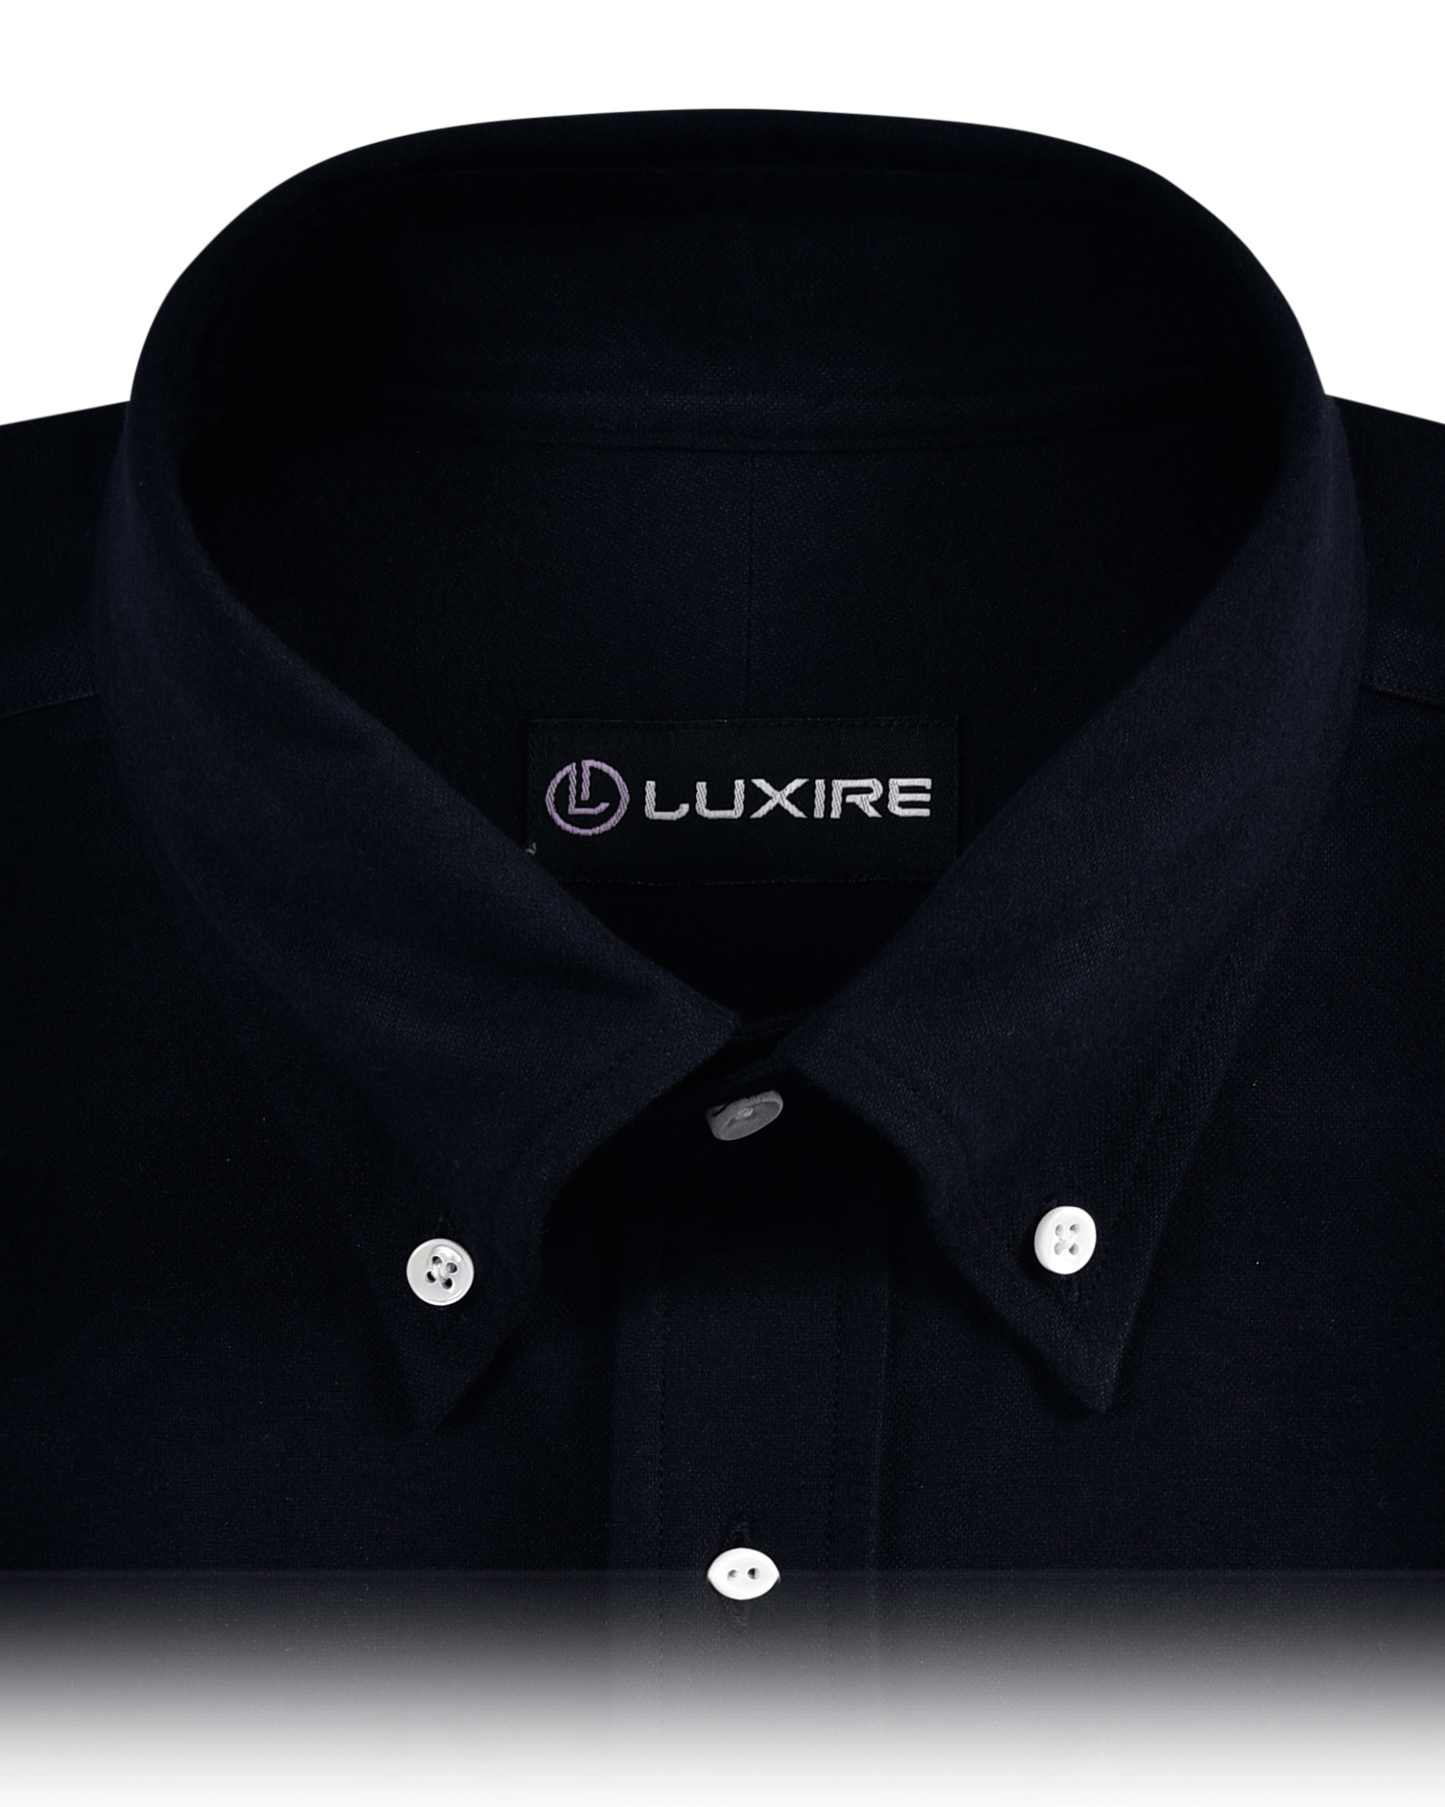 Collar of the custom oxford shirt for men by Luxire in midnight navy